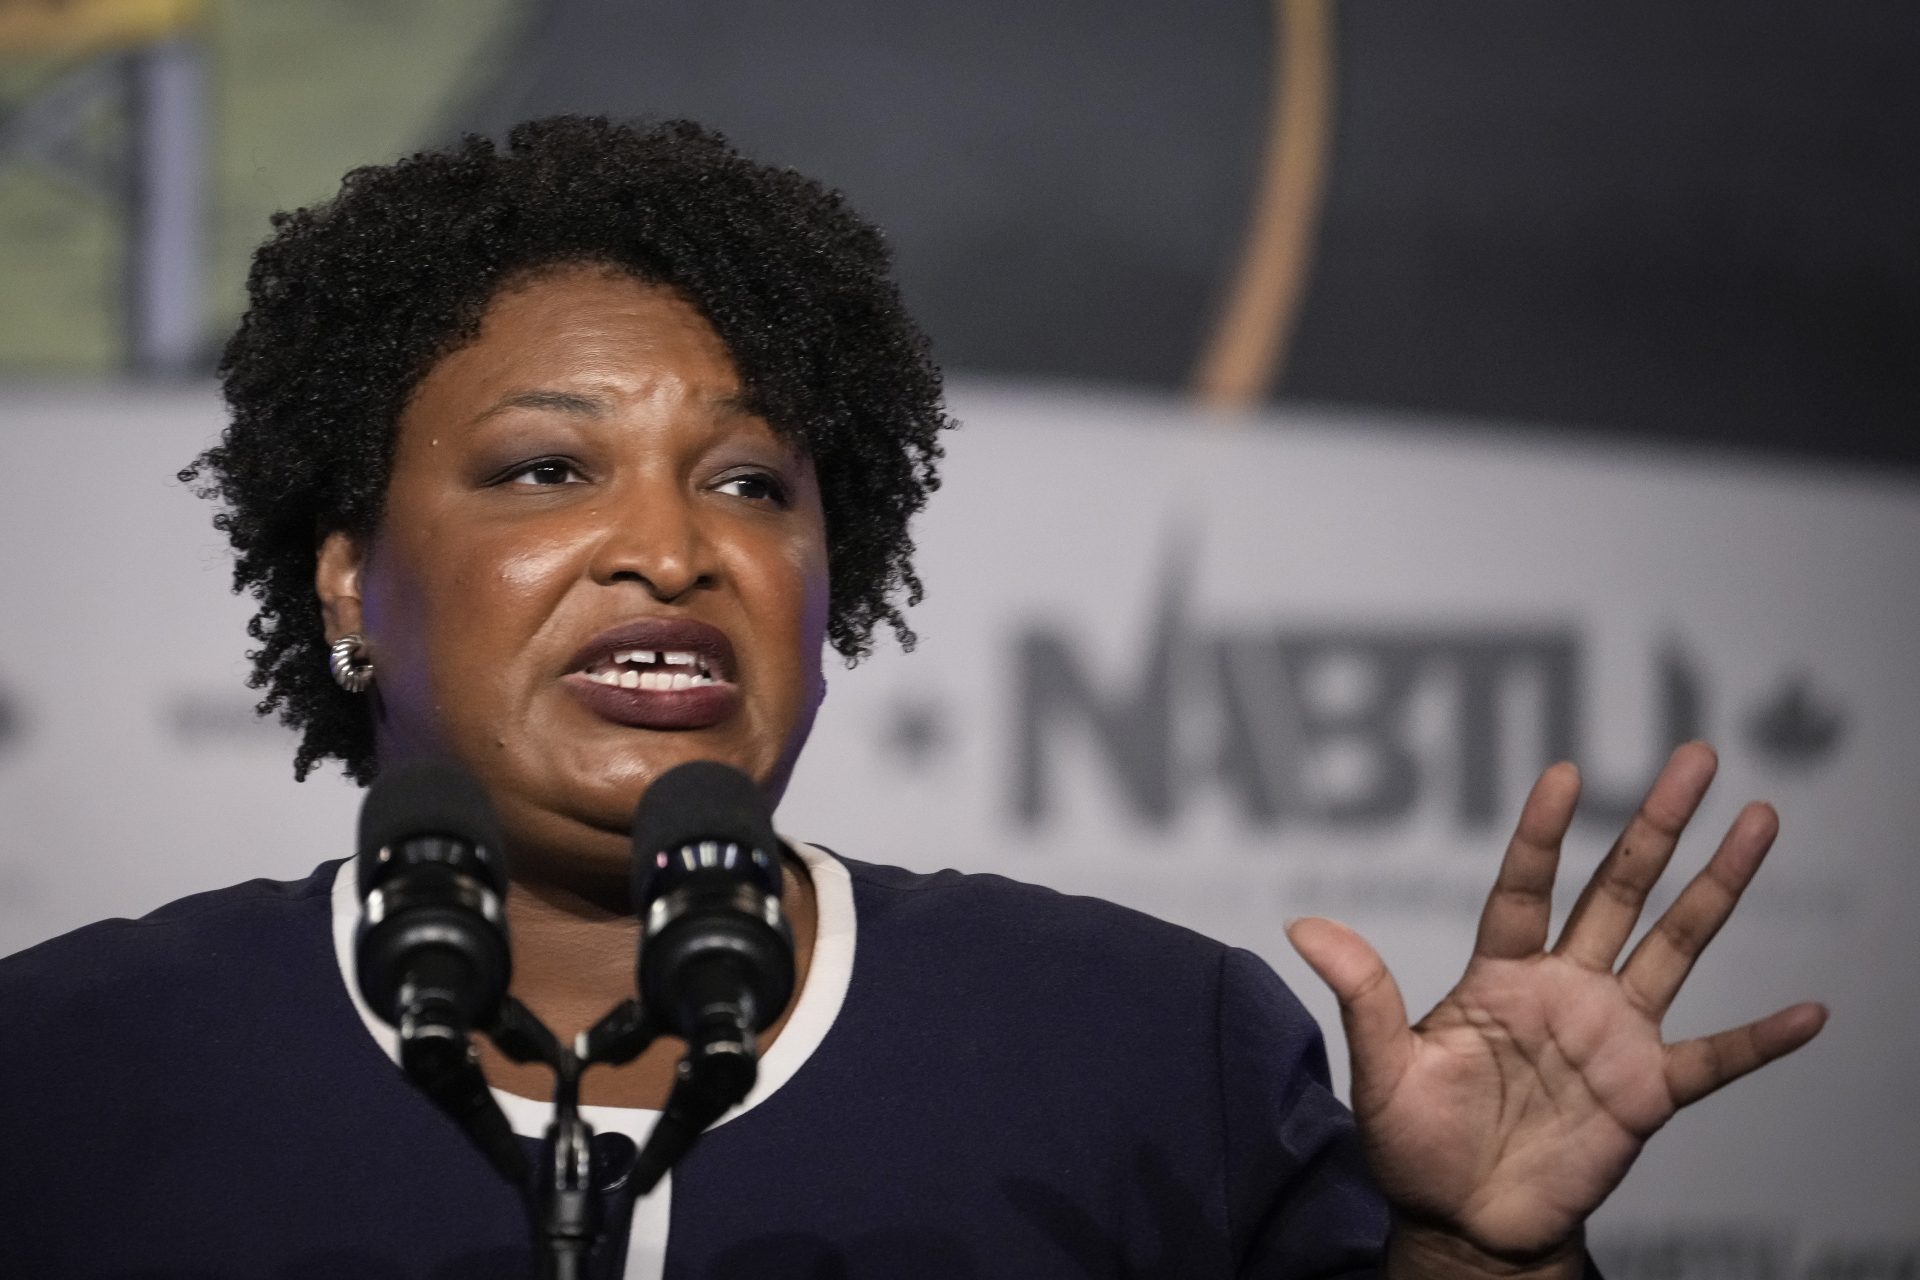 Georgia Governor Nominee Stacey Abrams Shares There Are 82 Counties In GA Without An OBGYN